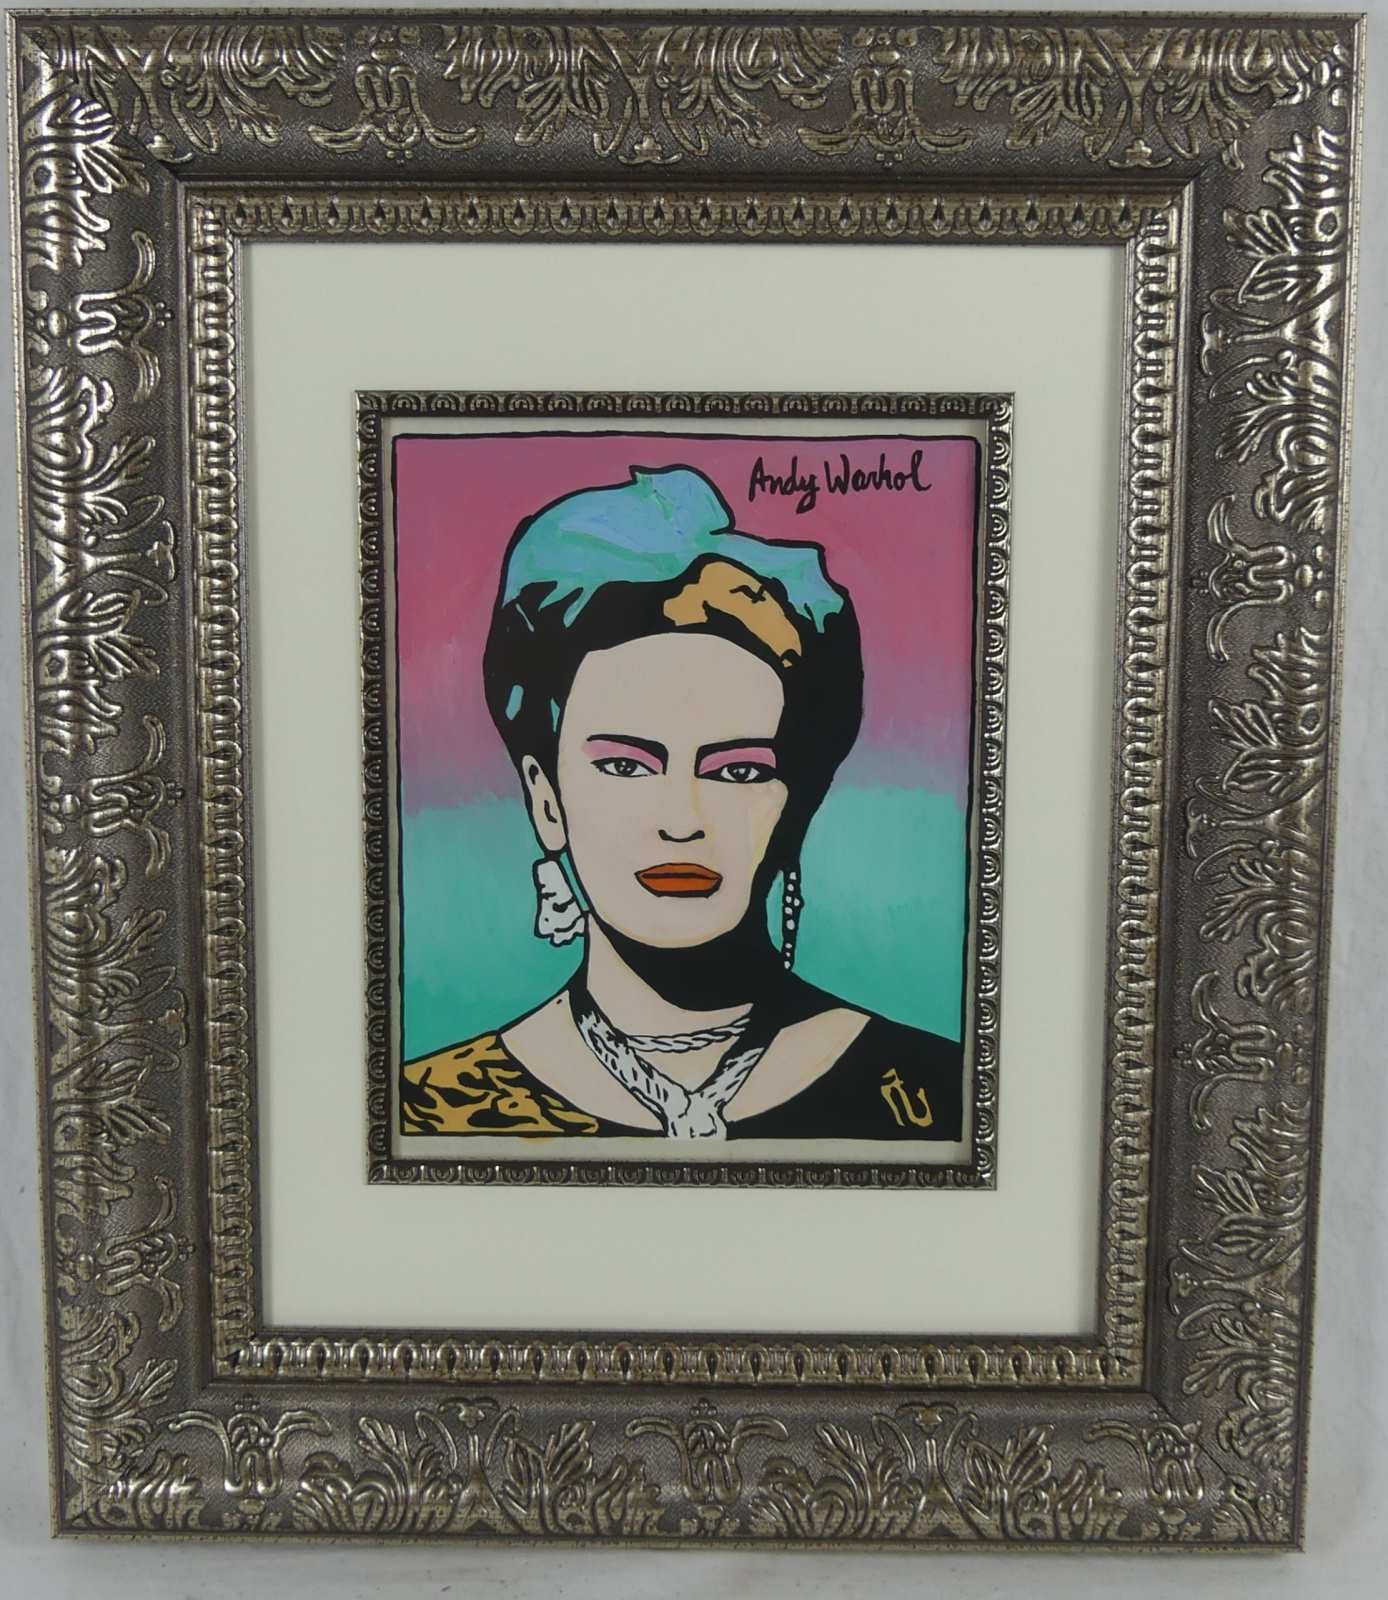 KAHLO by Andy Warhol